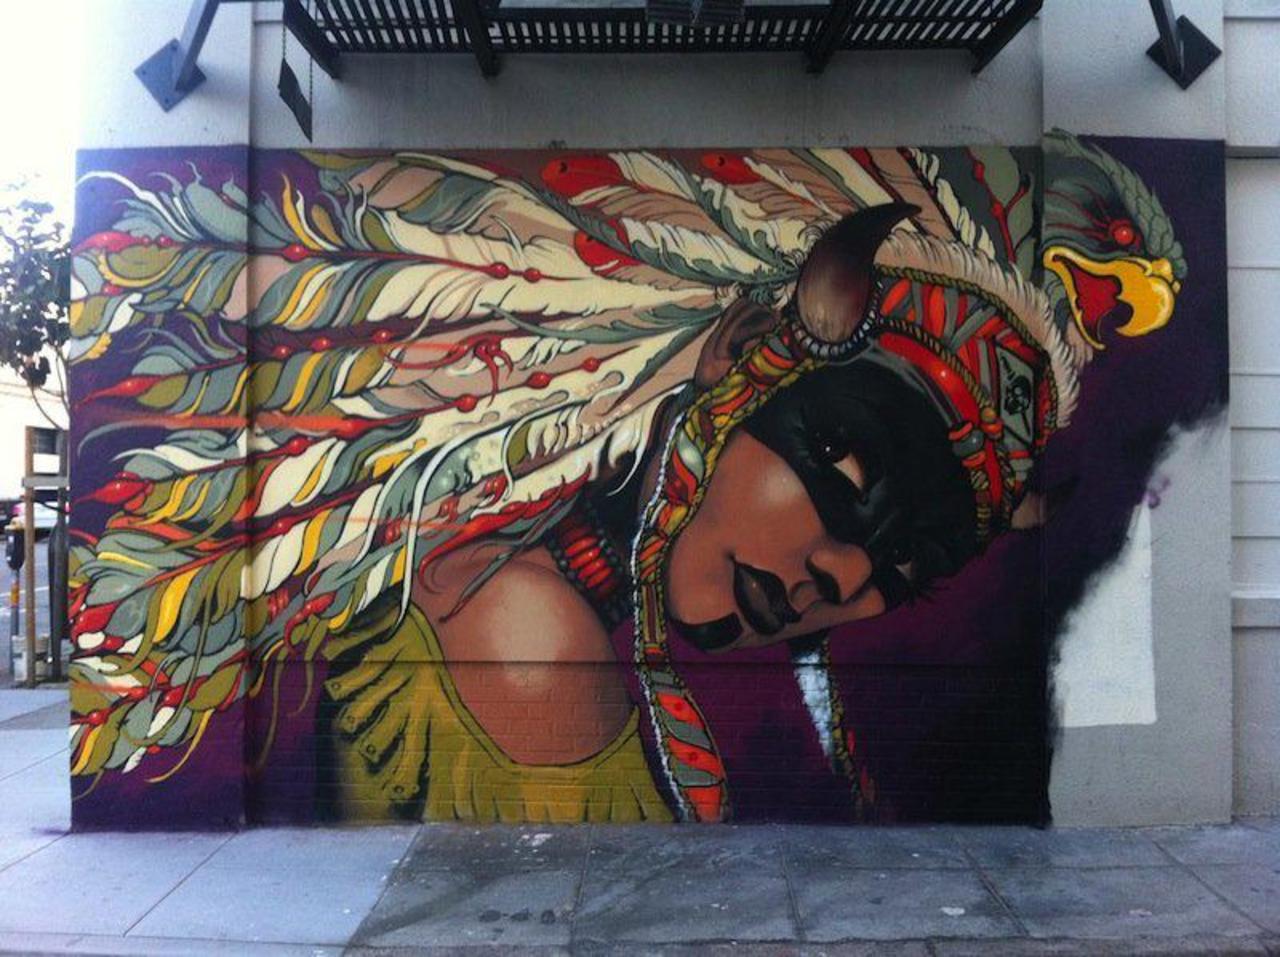 War bonnet. Find more amazing #graffiti in our gallery: http://bit.ly/1GPAOAT #mural #art http://t.co/AHY7qLza1u